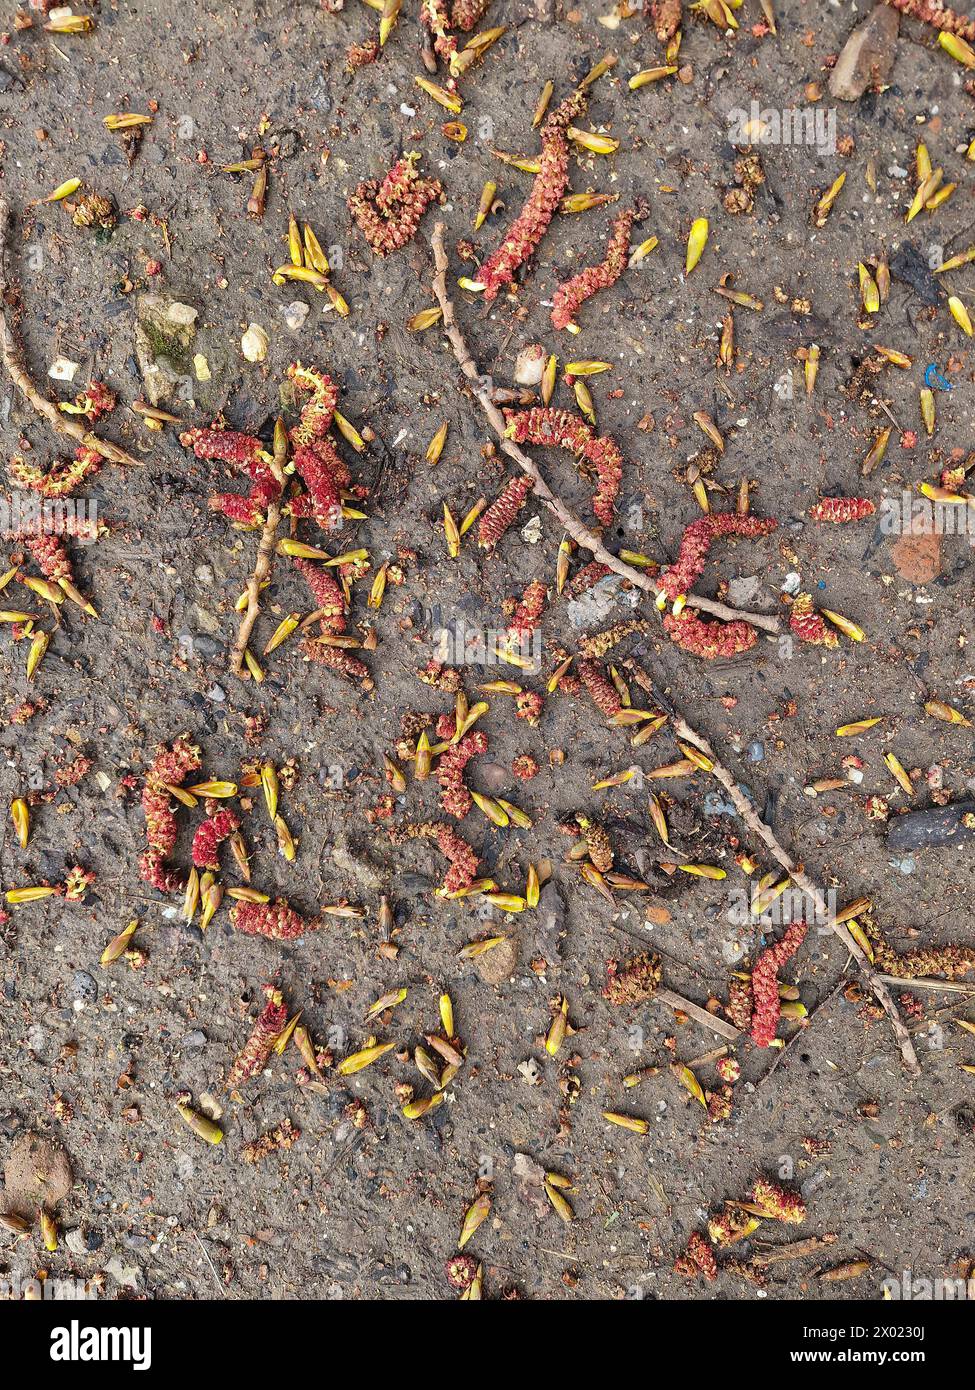 Abstract pattern of catkins, bud scales and twigs fallen from popular tree (populus sp.) Stock Photo